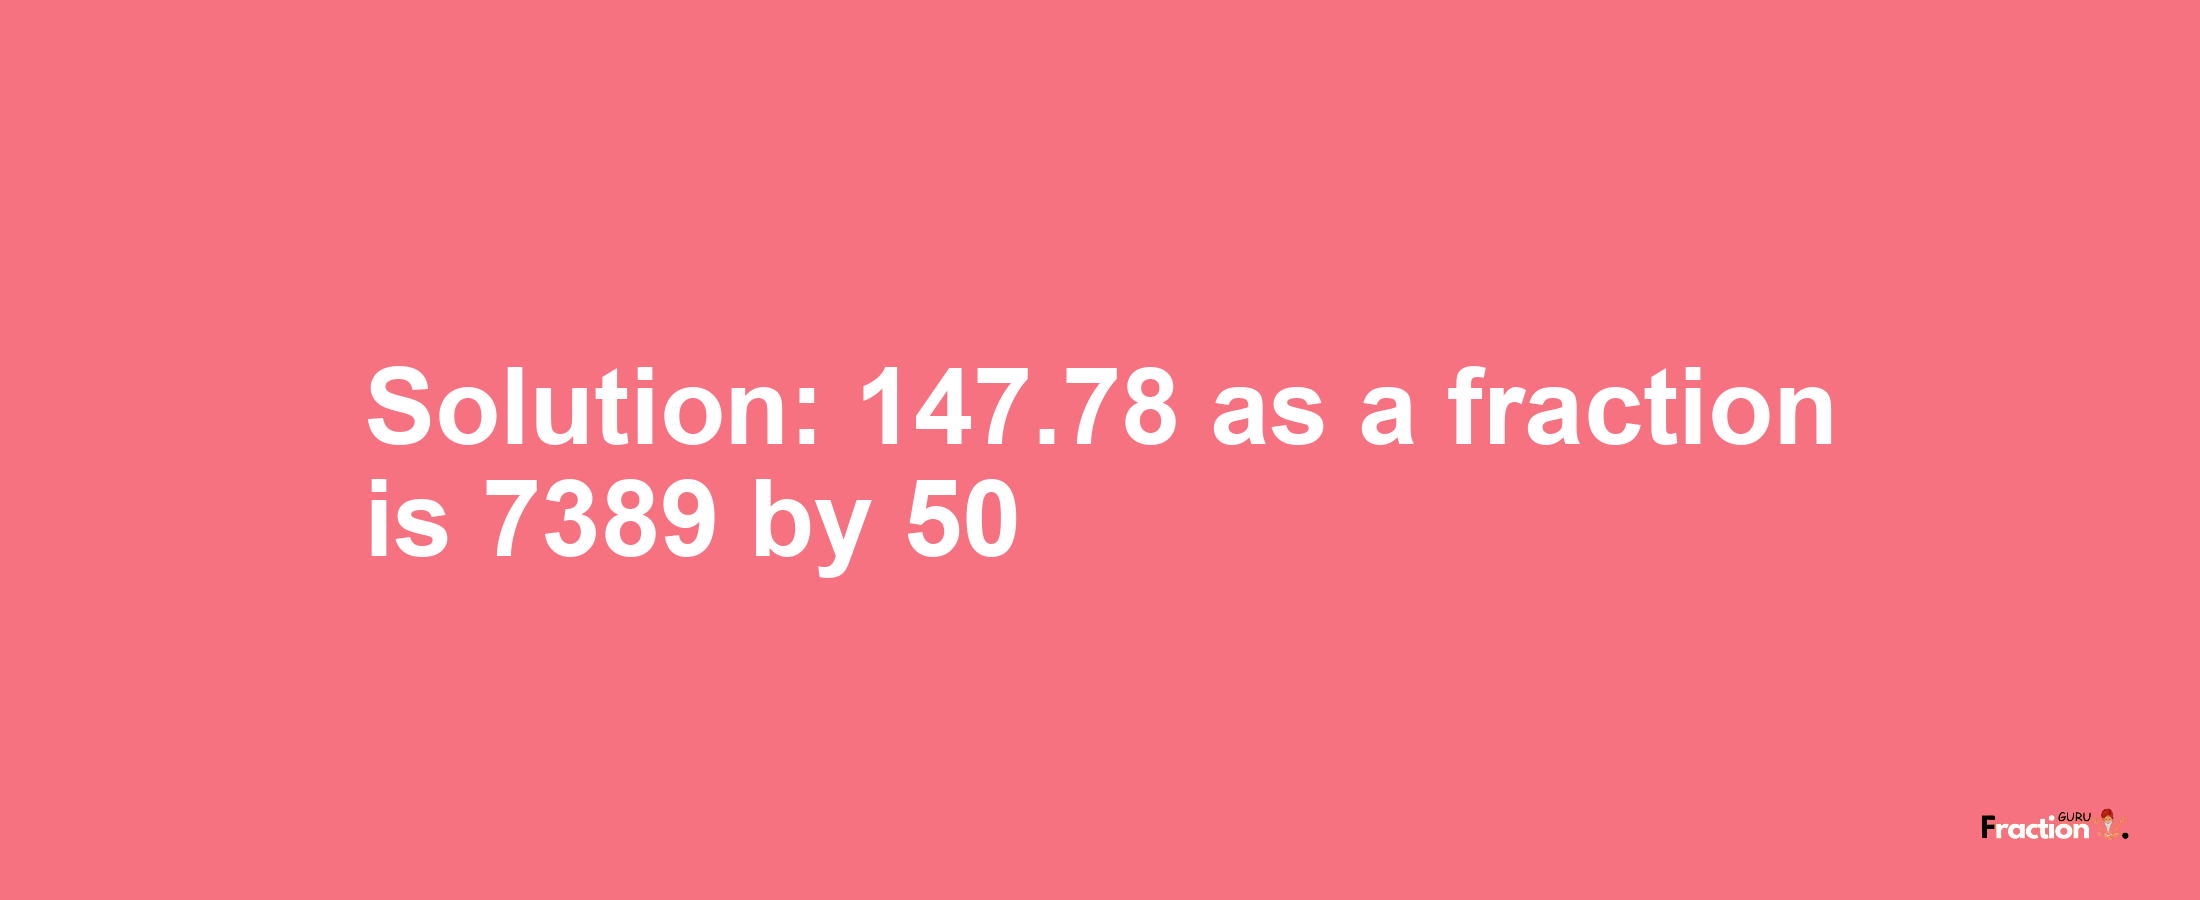 Solution:147.78 as a fraction is 7389/50